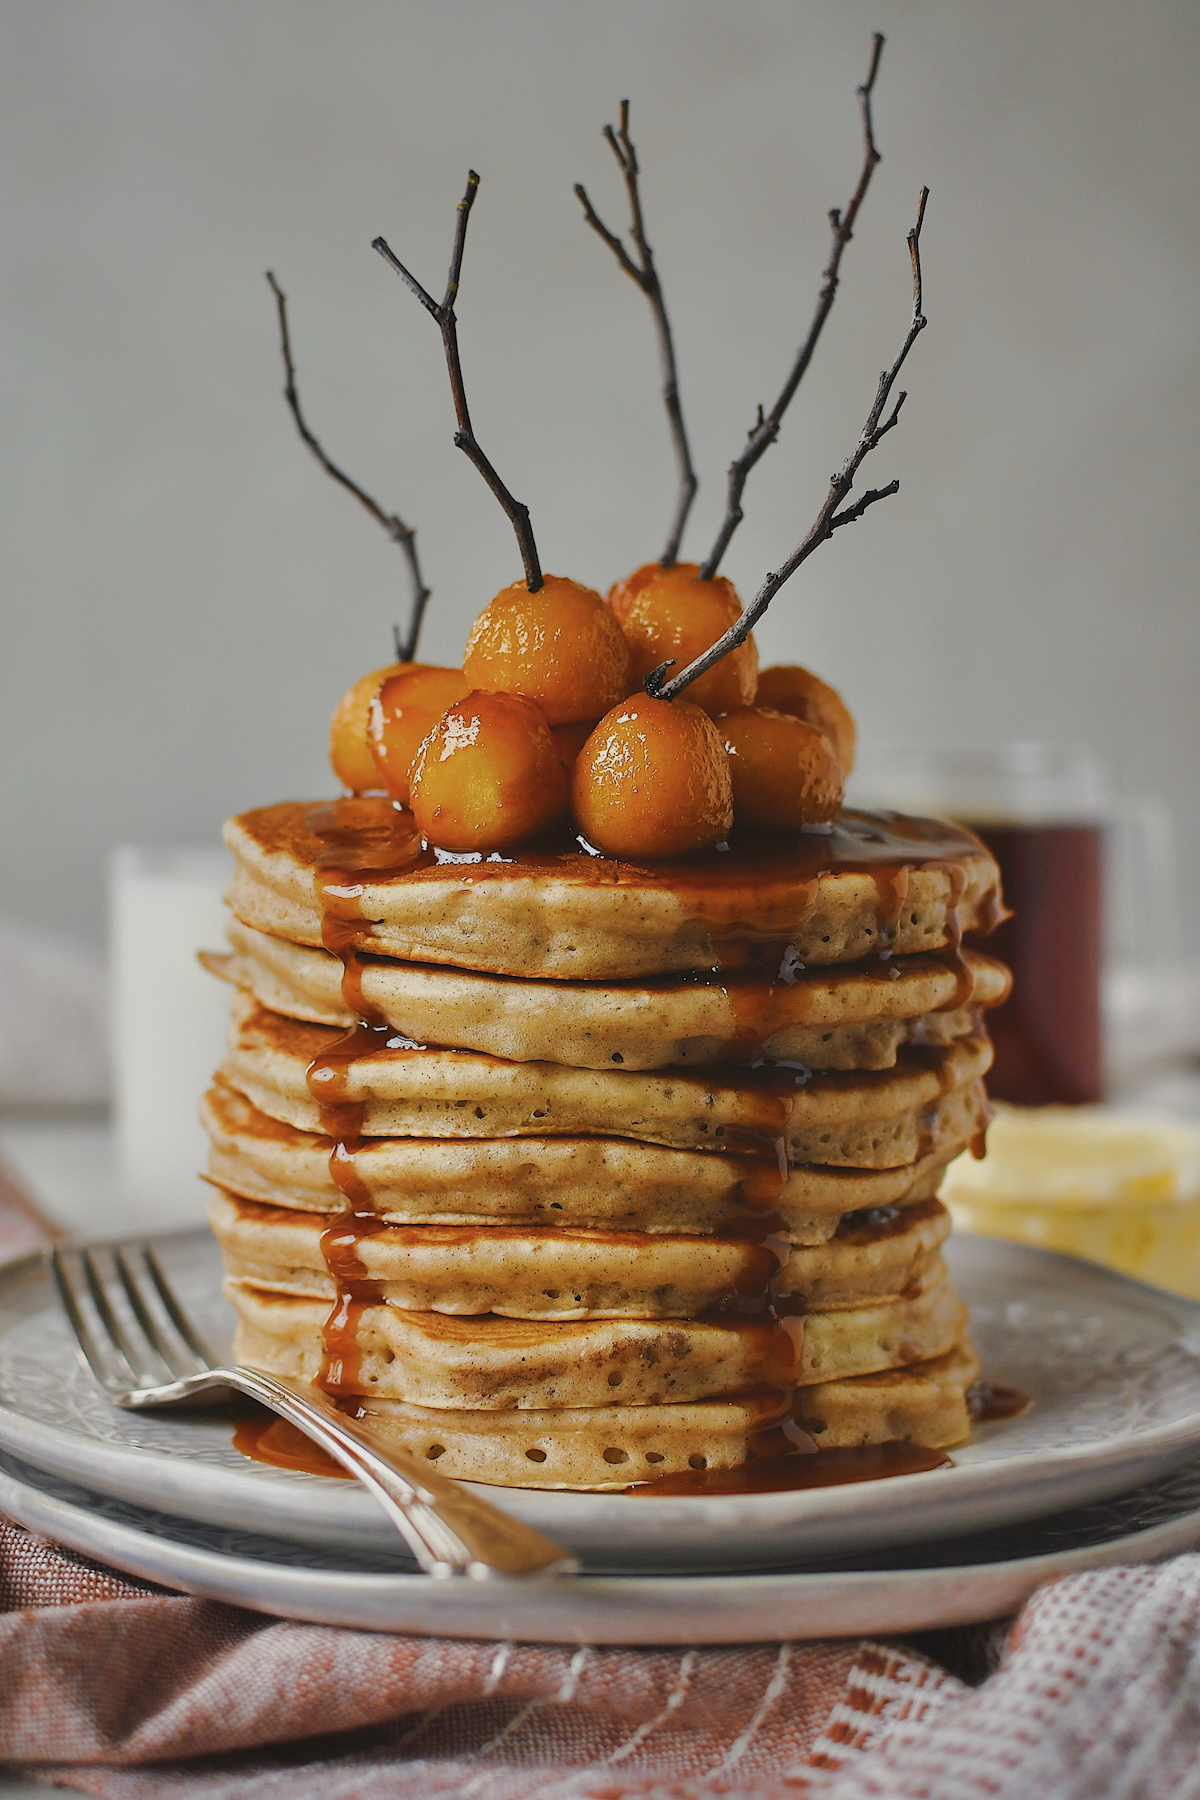 Caramel Apple Pancakes stacked high and topped with mini caramel apples and their sauce. Foraged twigs placed in some to mimic the sticks that come in traditional sized caramel apples.